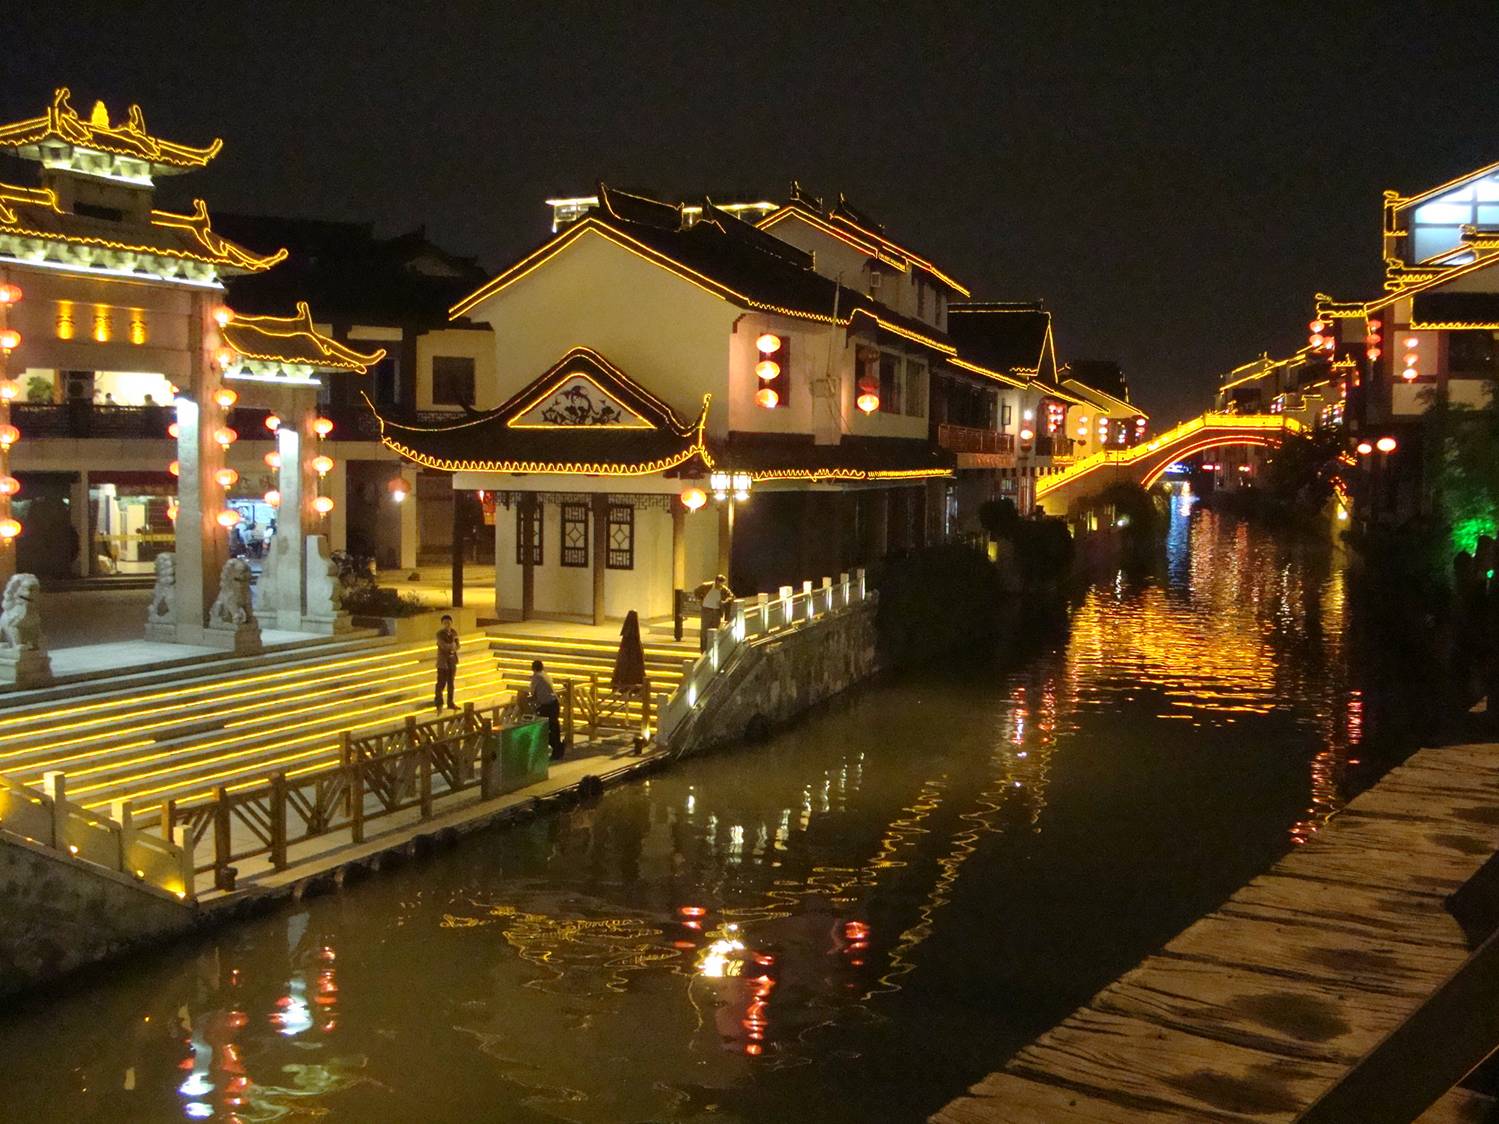 picture:  The canal boat landing at the Temple Market, Wuxi, China